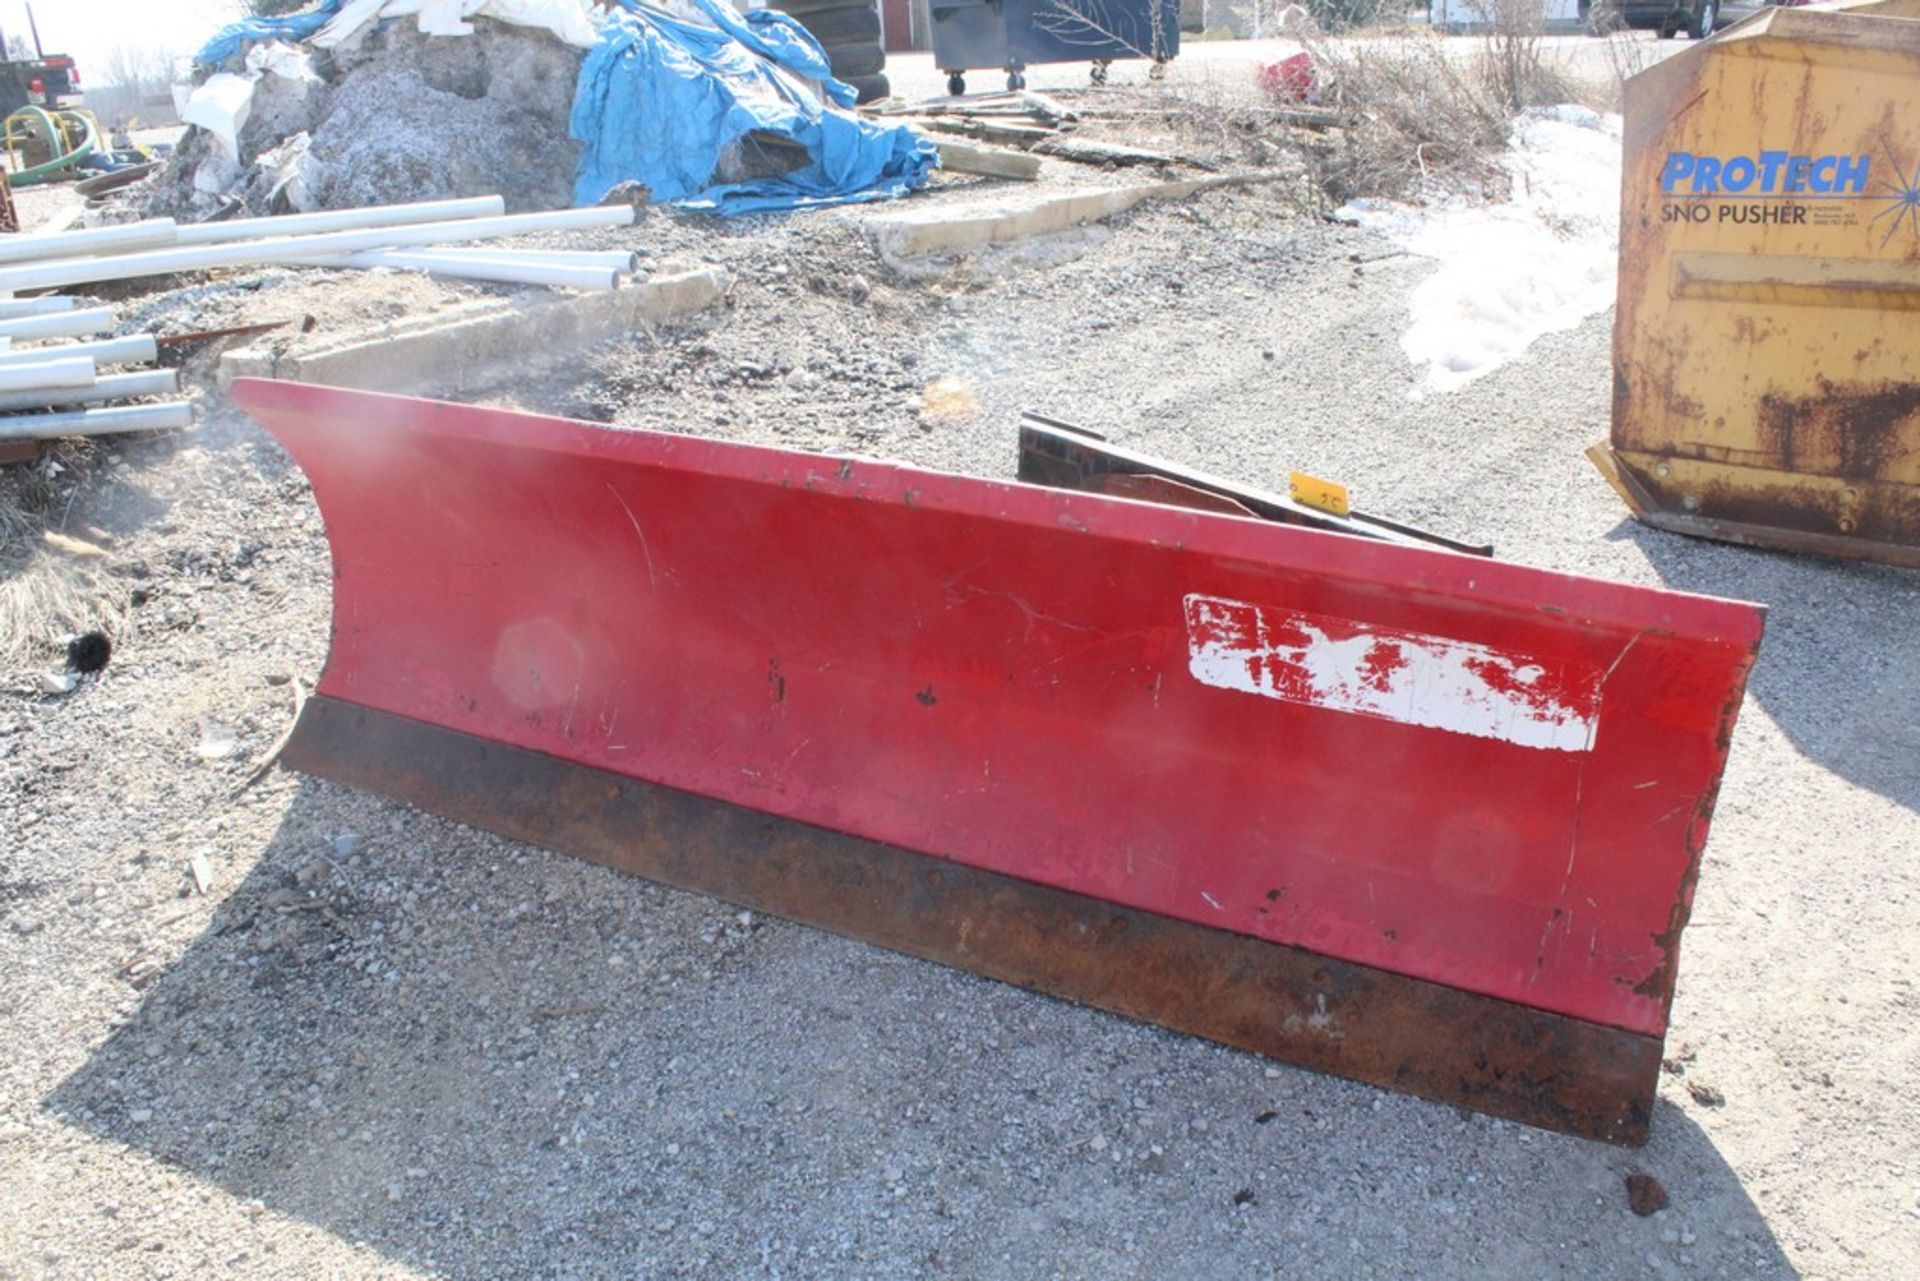 CUSTOM FABRICATED 96-IN. BOLT-TOGETHER HYDRAULIC SNOW PLOW ATTACHMENT, 96-IN. BLADE, TO FIT SKID